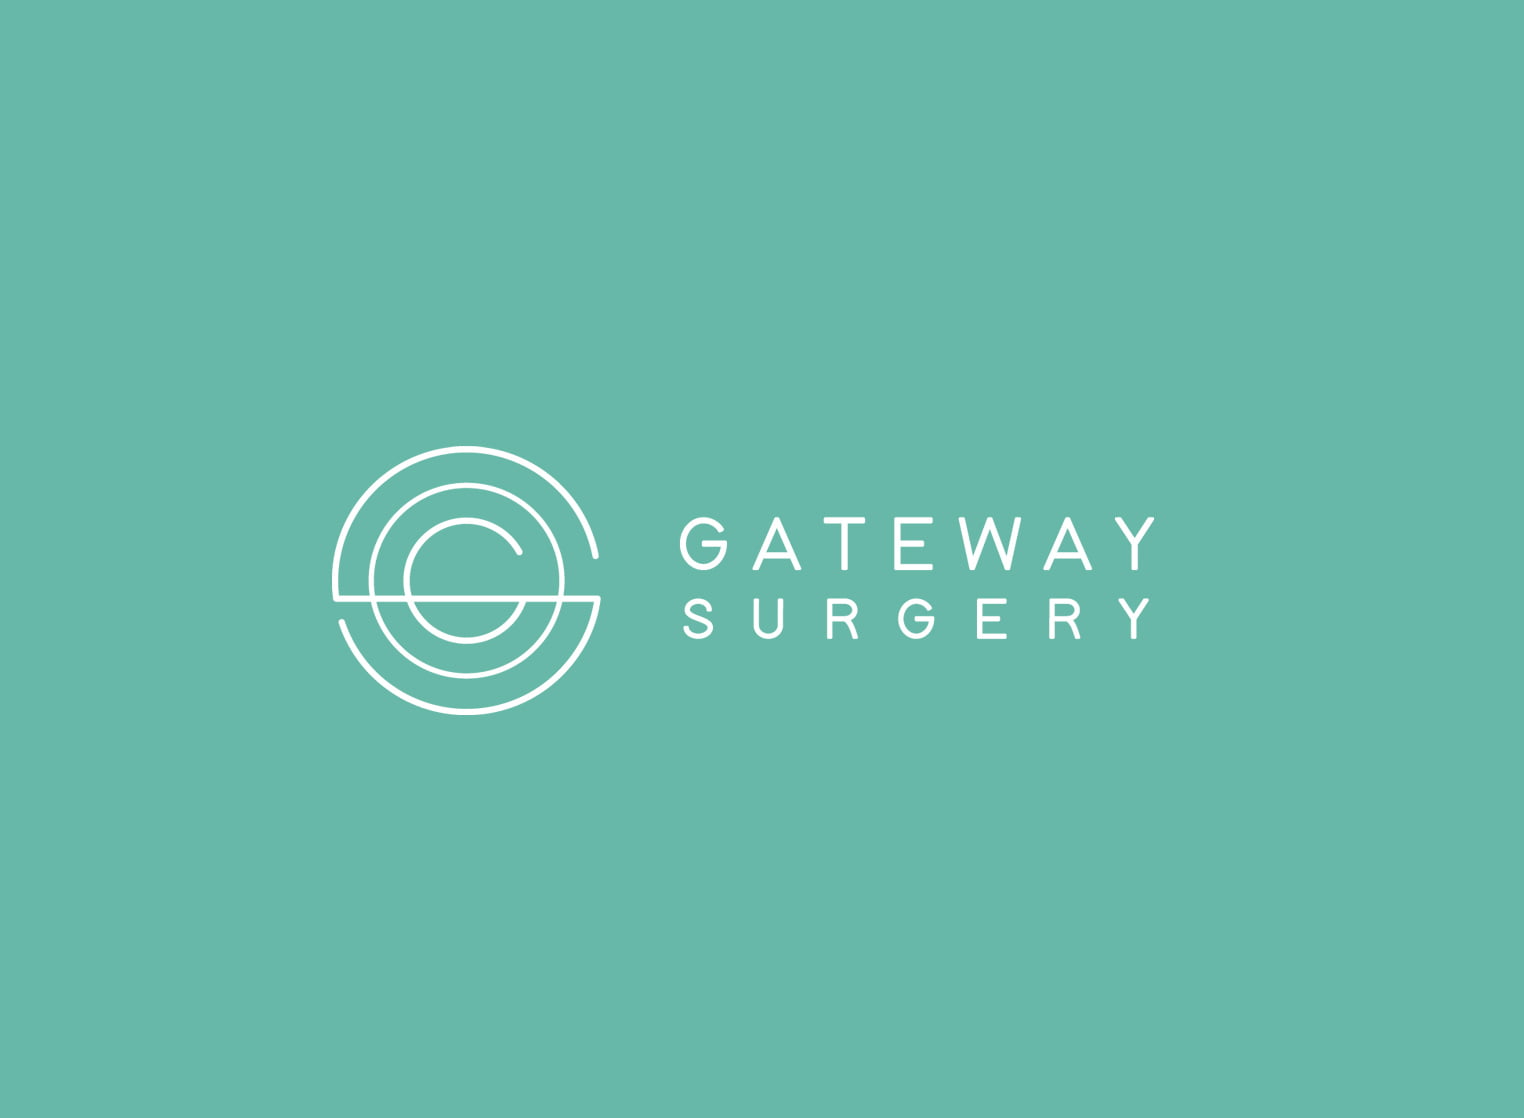 Gateway Surgery Logo | Creative Elements Consulting